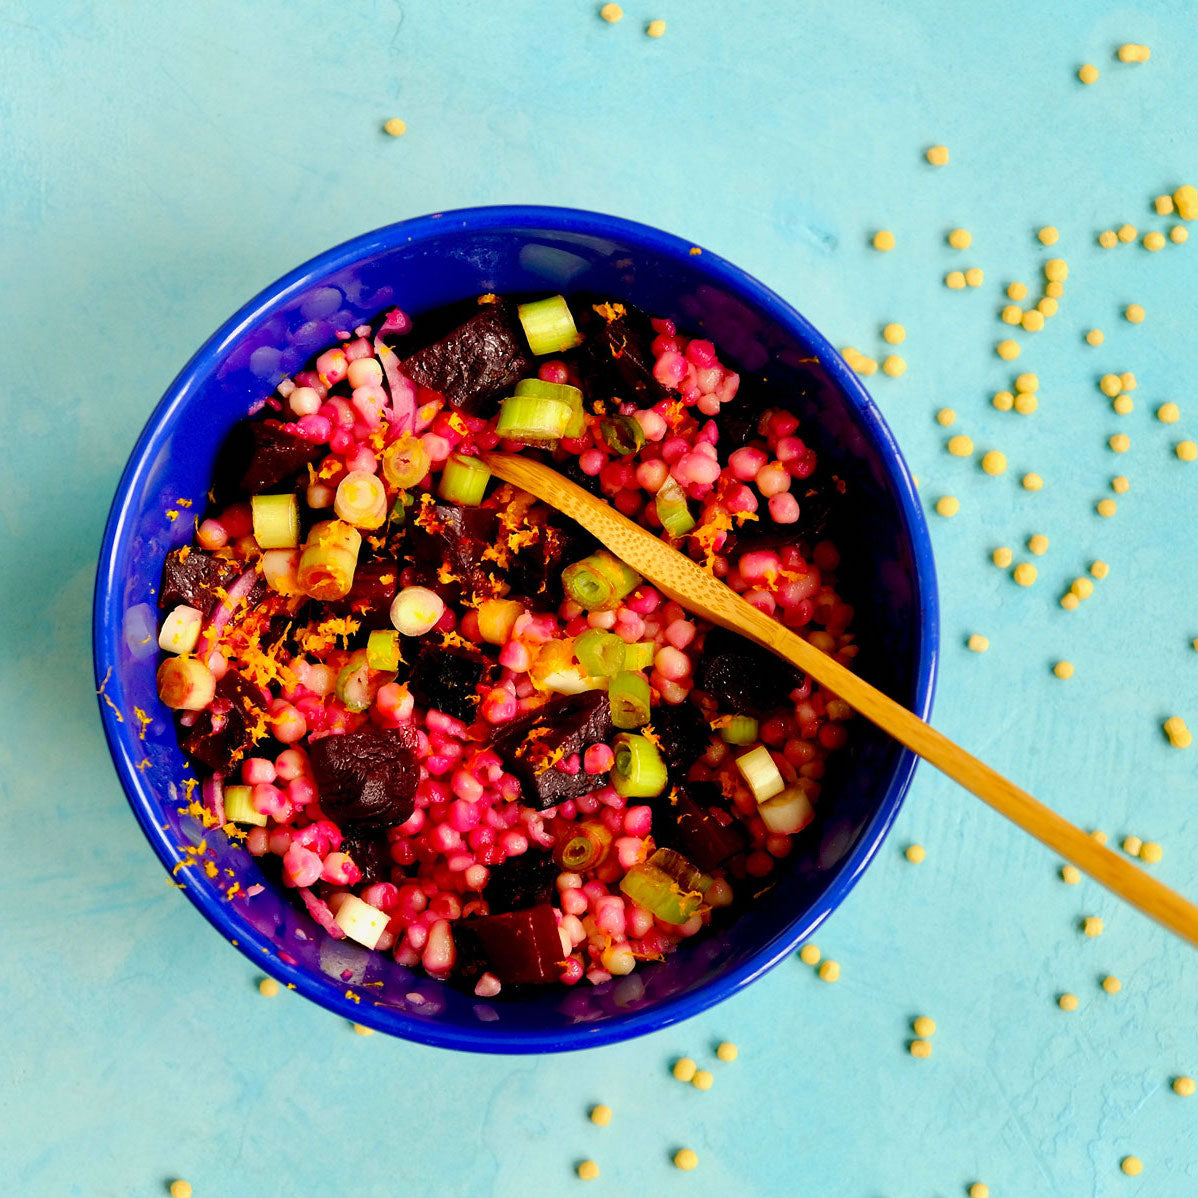 A Mediterranean couscous salad with a roasted beet and orange twist